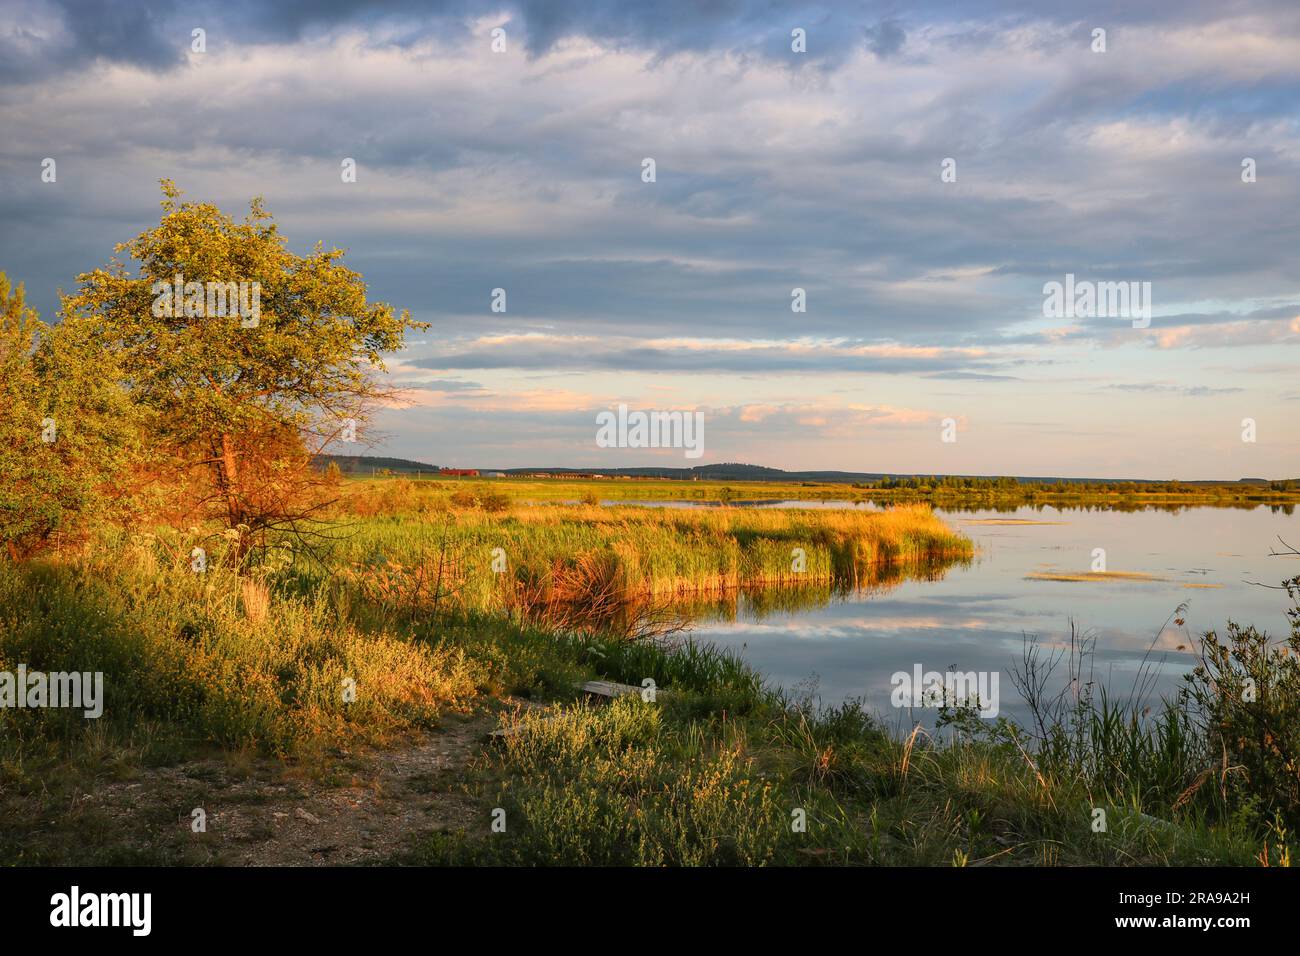 Summer landscape - riverbanks overgrown with reeds, colorful sunset on the river. Stock Photo